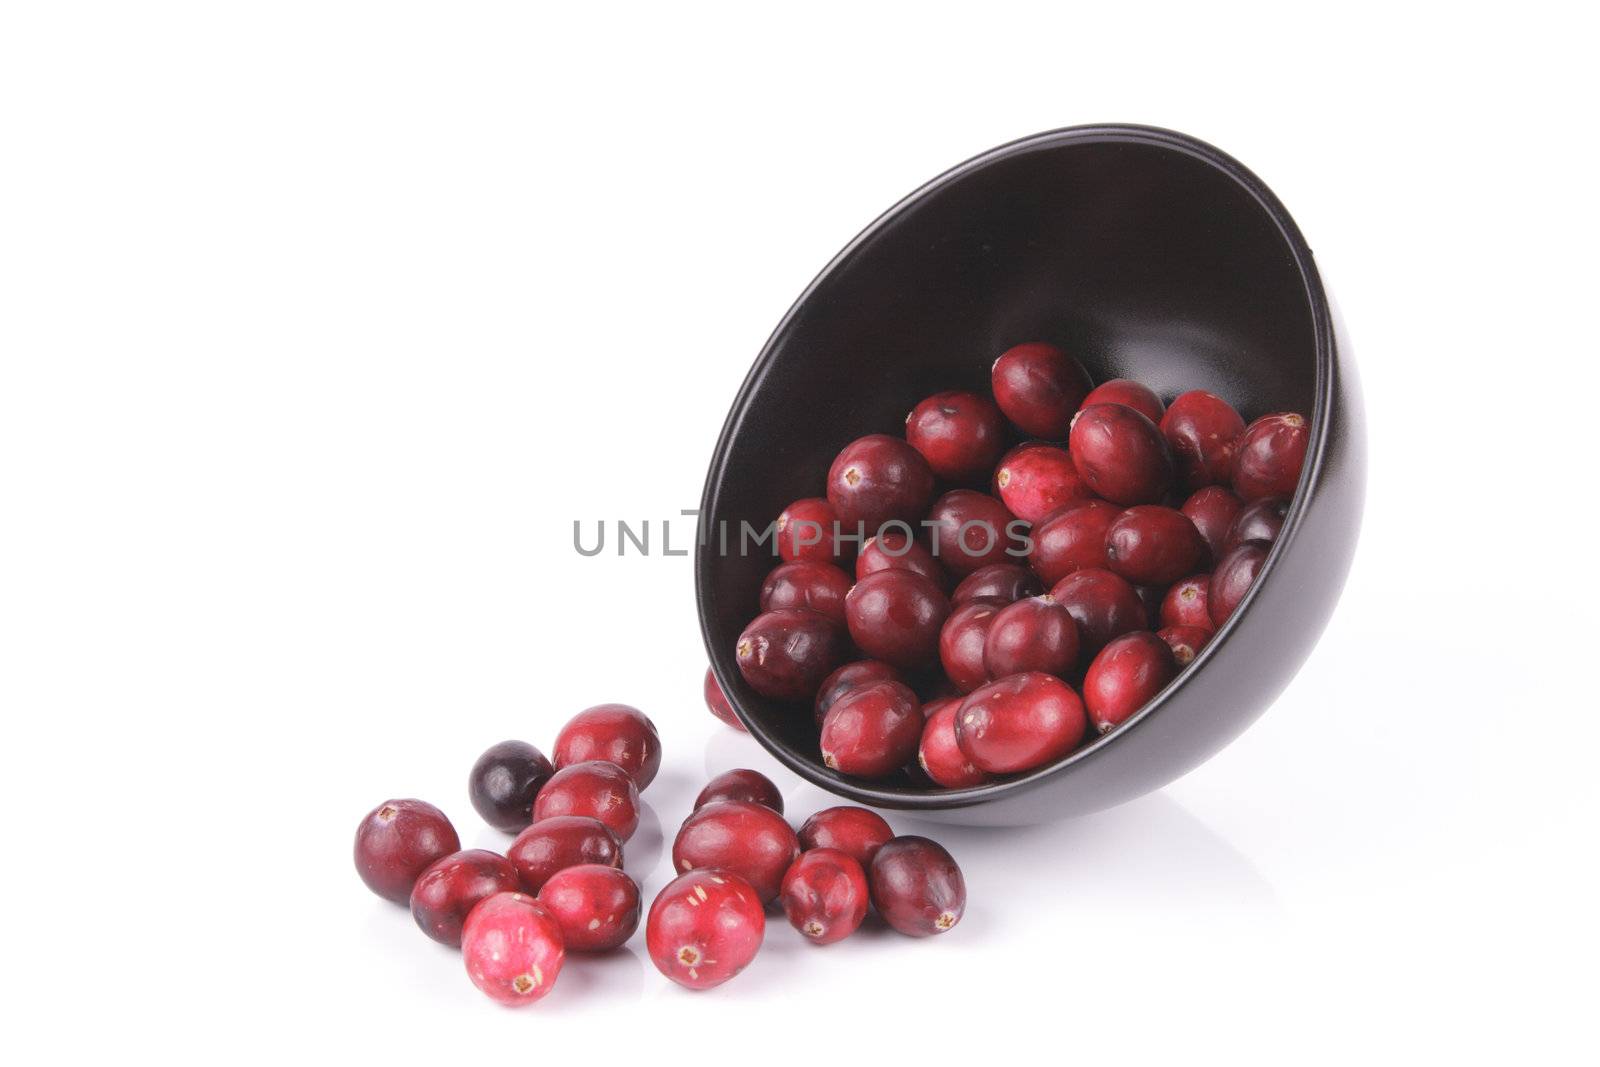 Red ripe cranberries spilling out of a small round black bowl on its side with a reflective white background